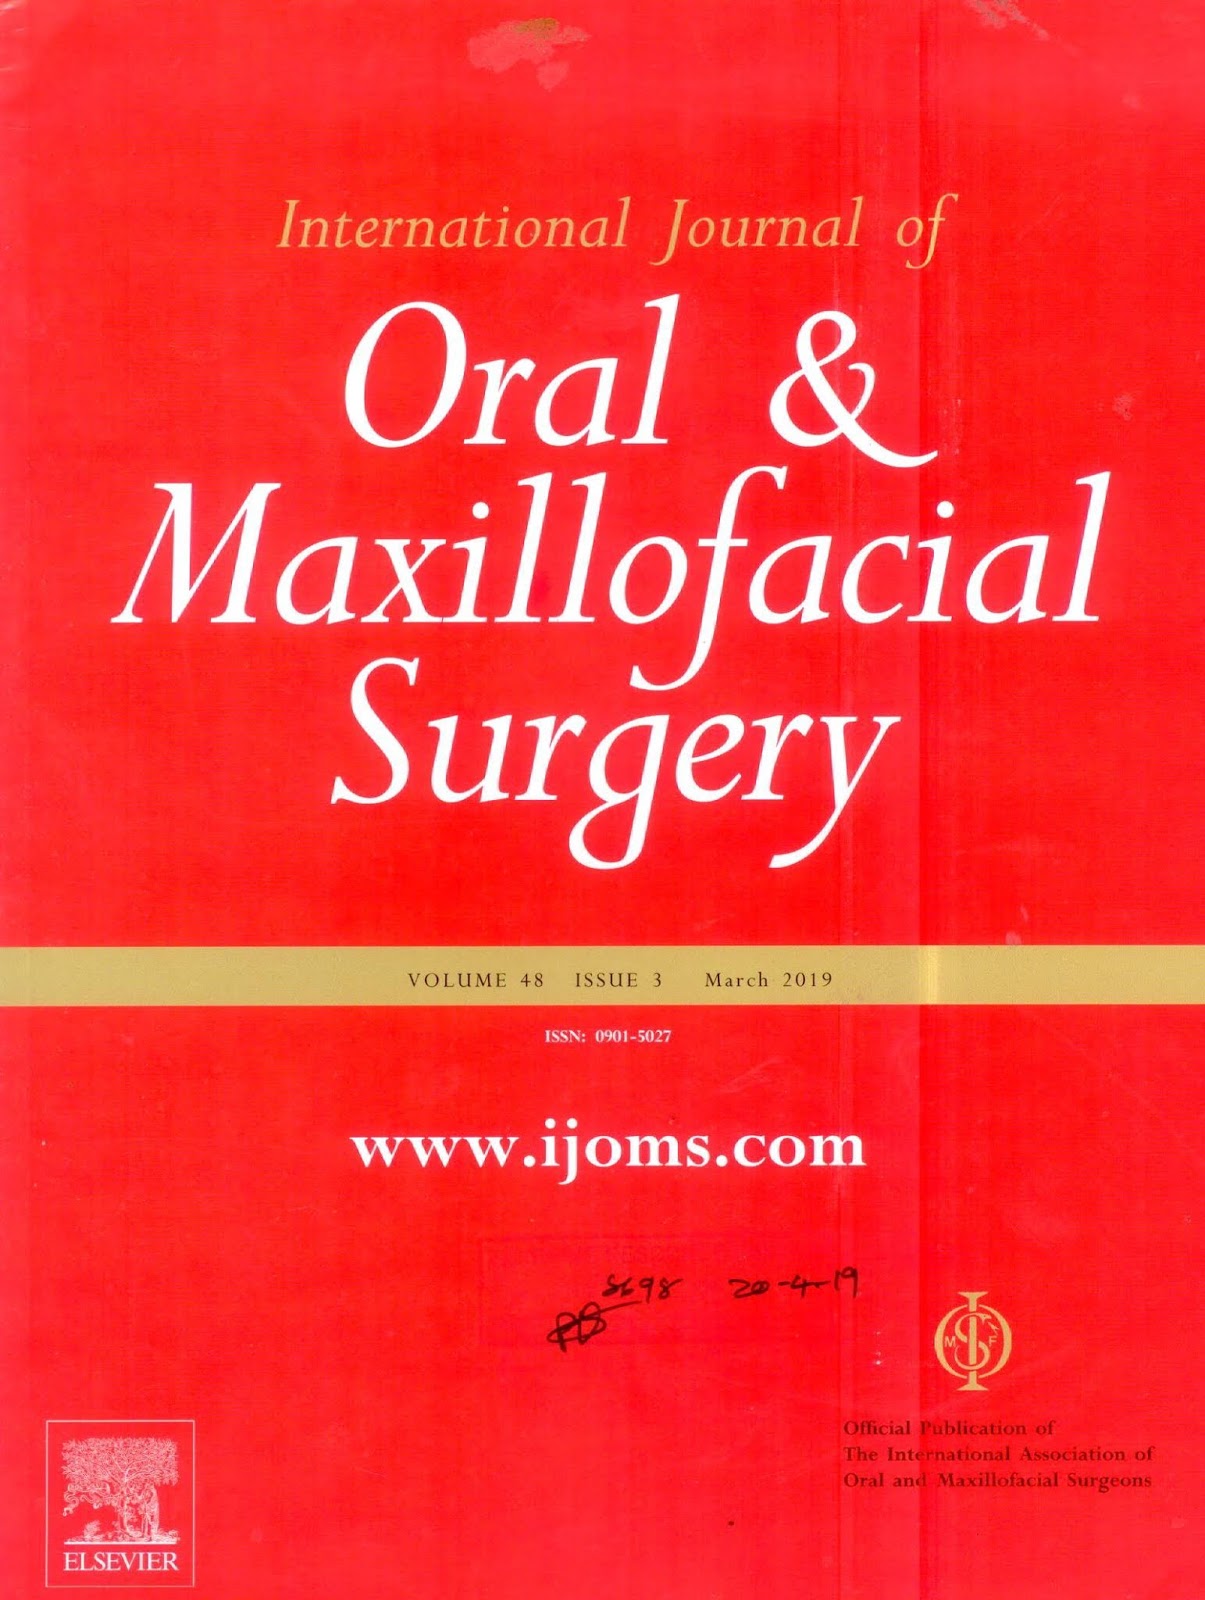 https://www.sciencedirect.com/journal/international-journal-of-oral-and-maxillofacial-surgery/vol/48/issue/3